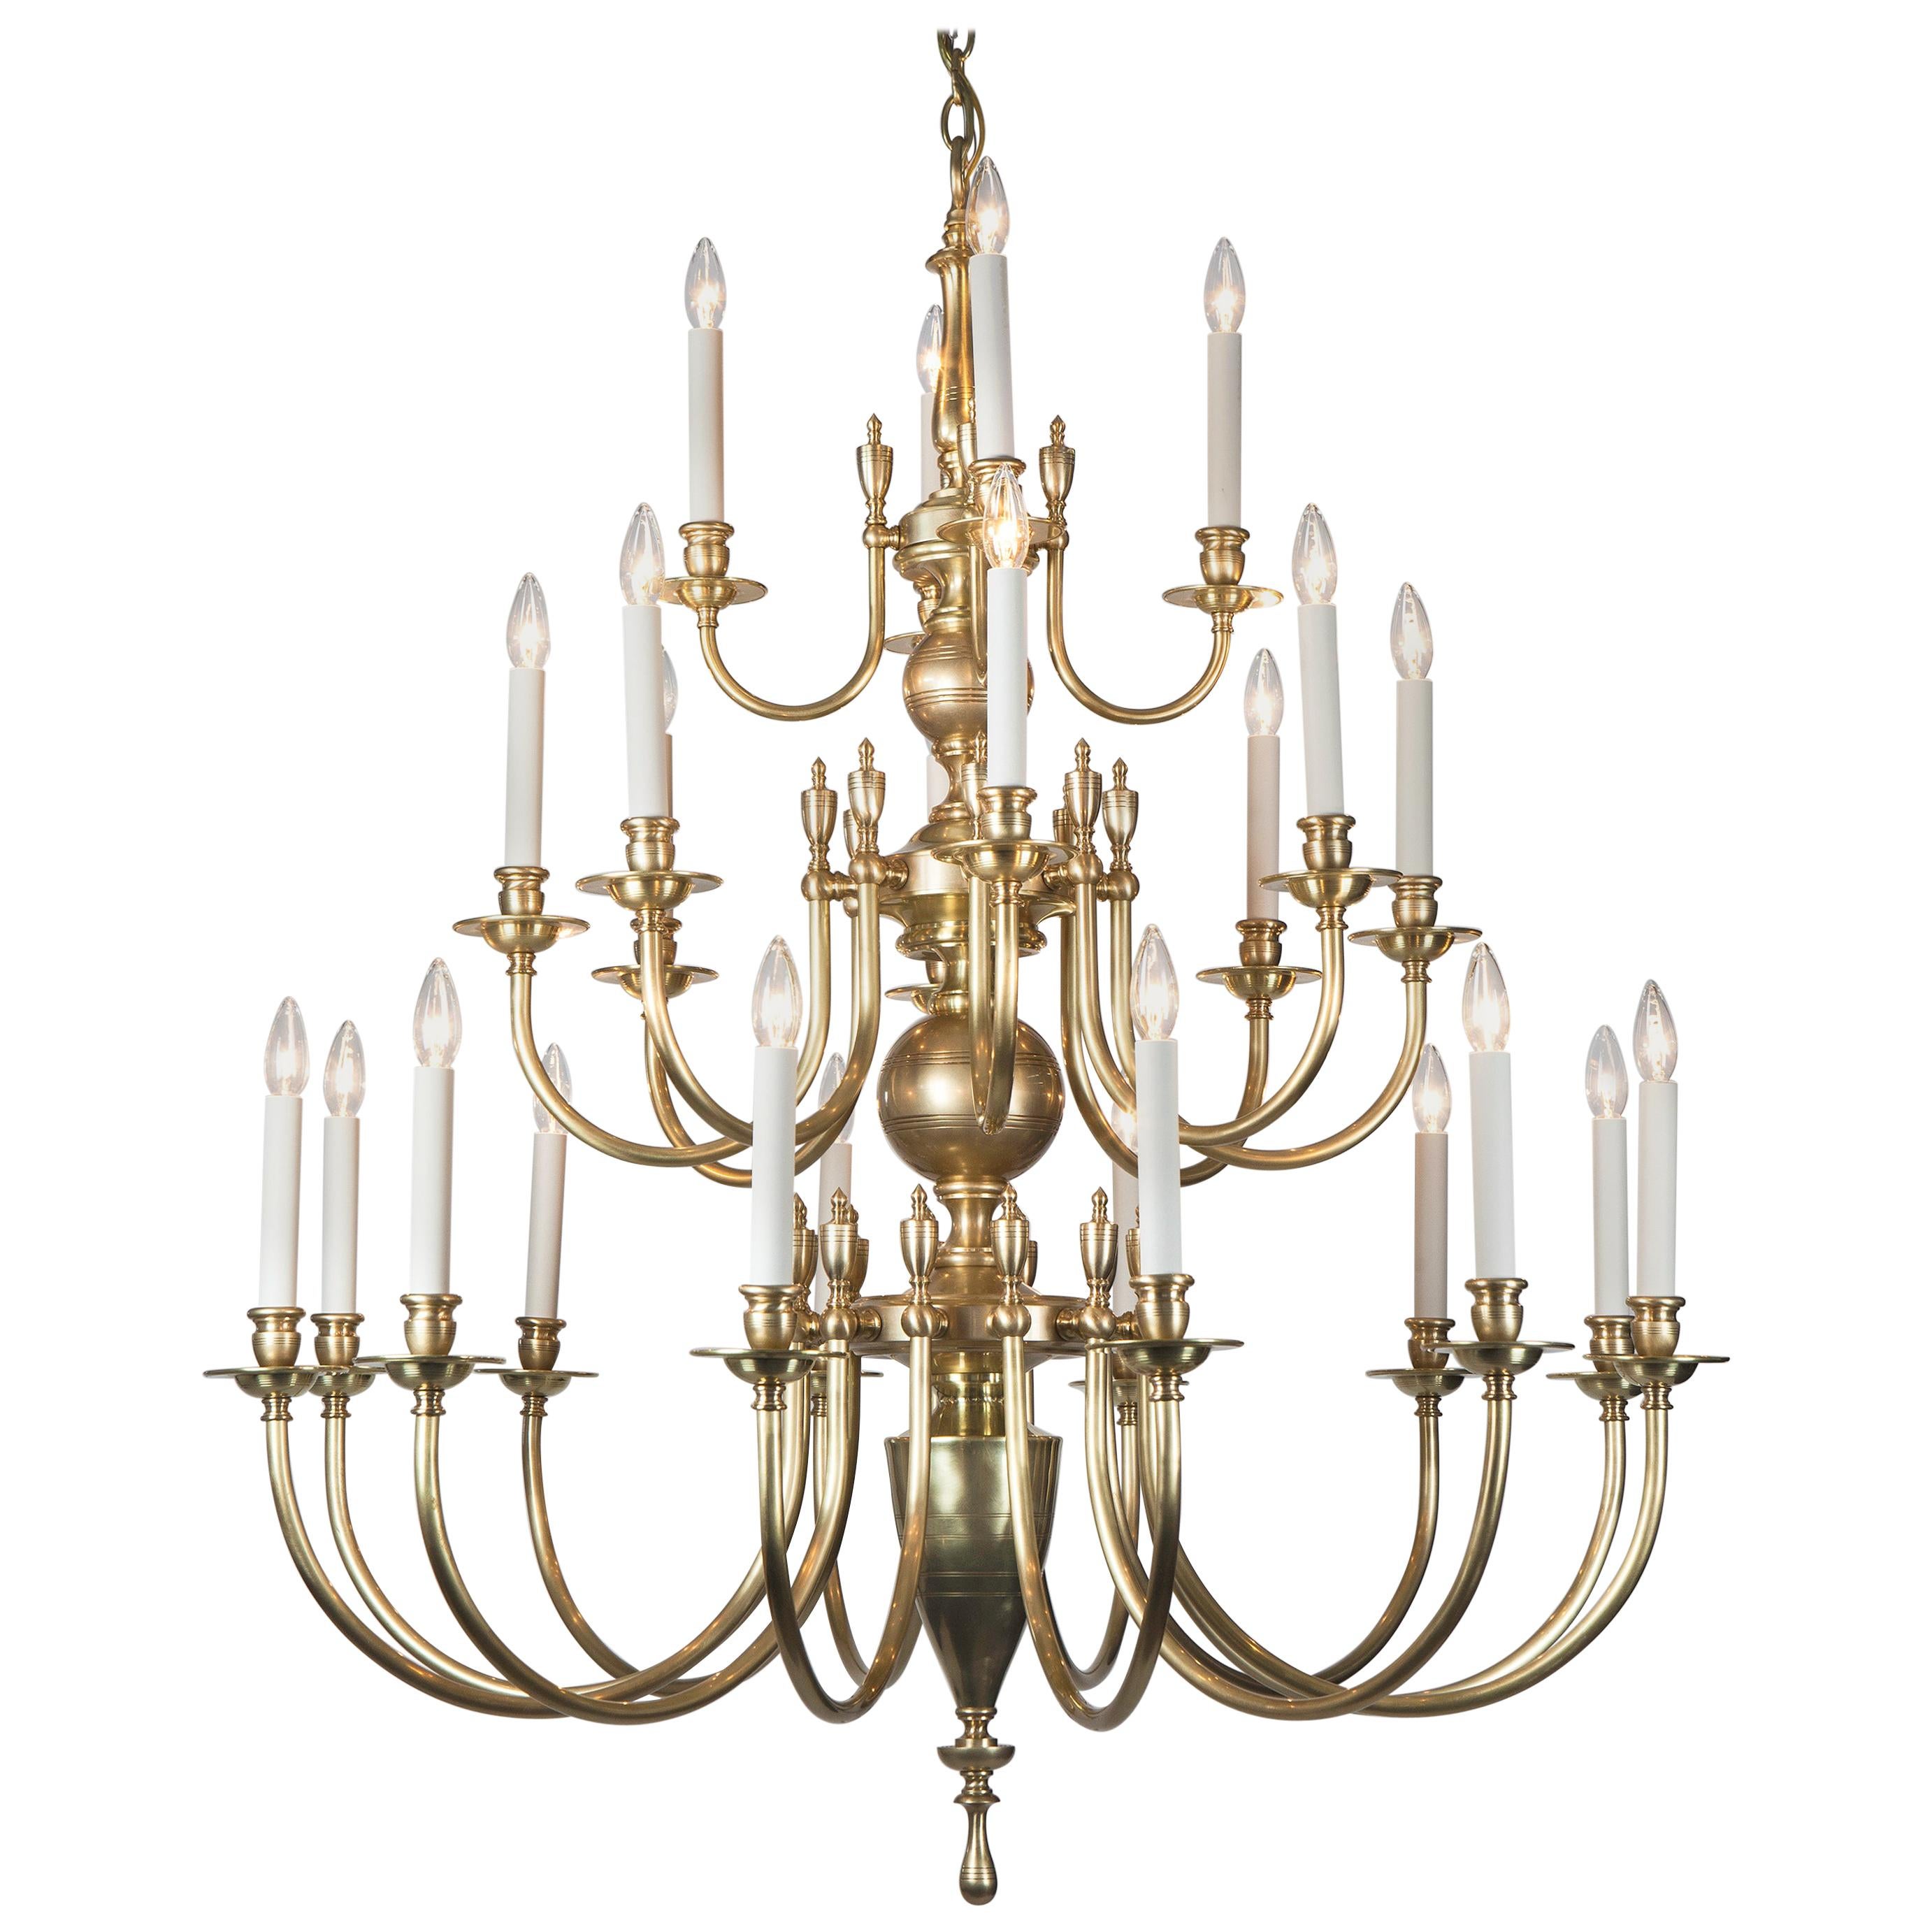 Three-Tier Solid Brass Astrid 24 Chandelier by Remains Lighting, Burnished Brass